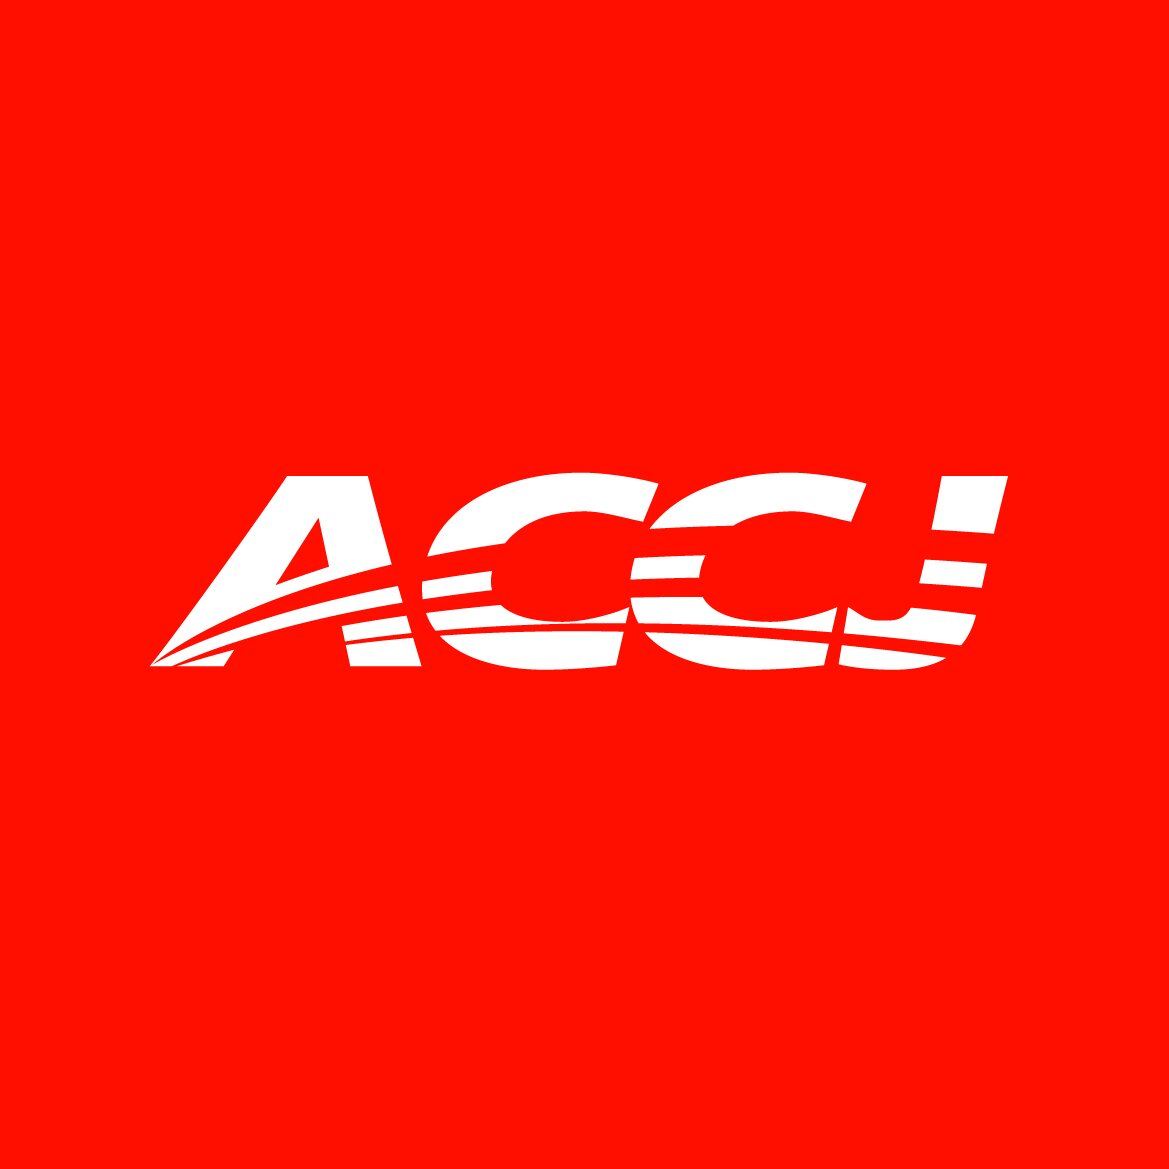 About the ACCJ — ACCJ The American Chamber of Commerce in Japan